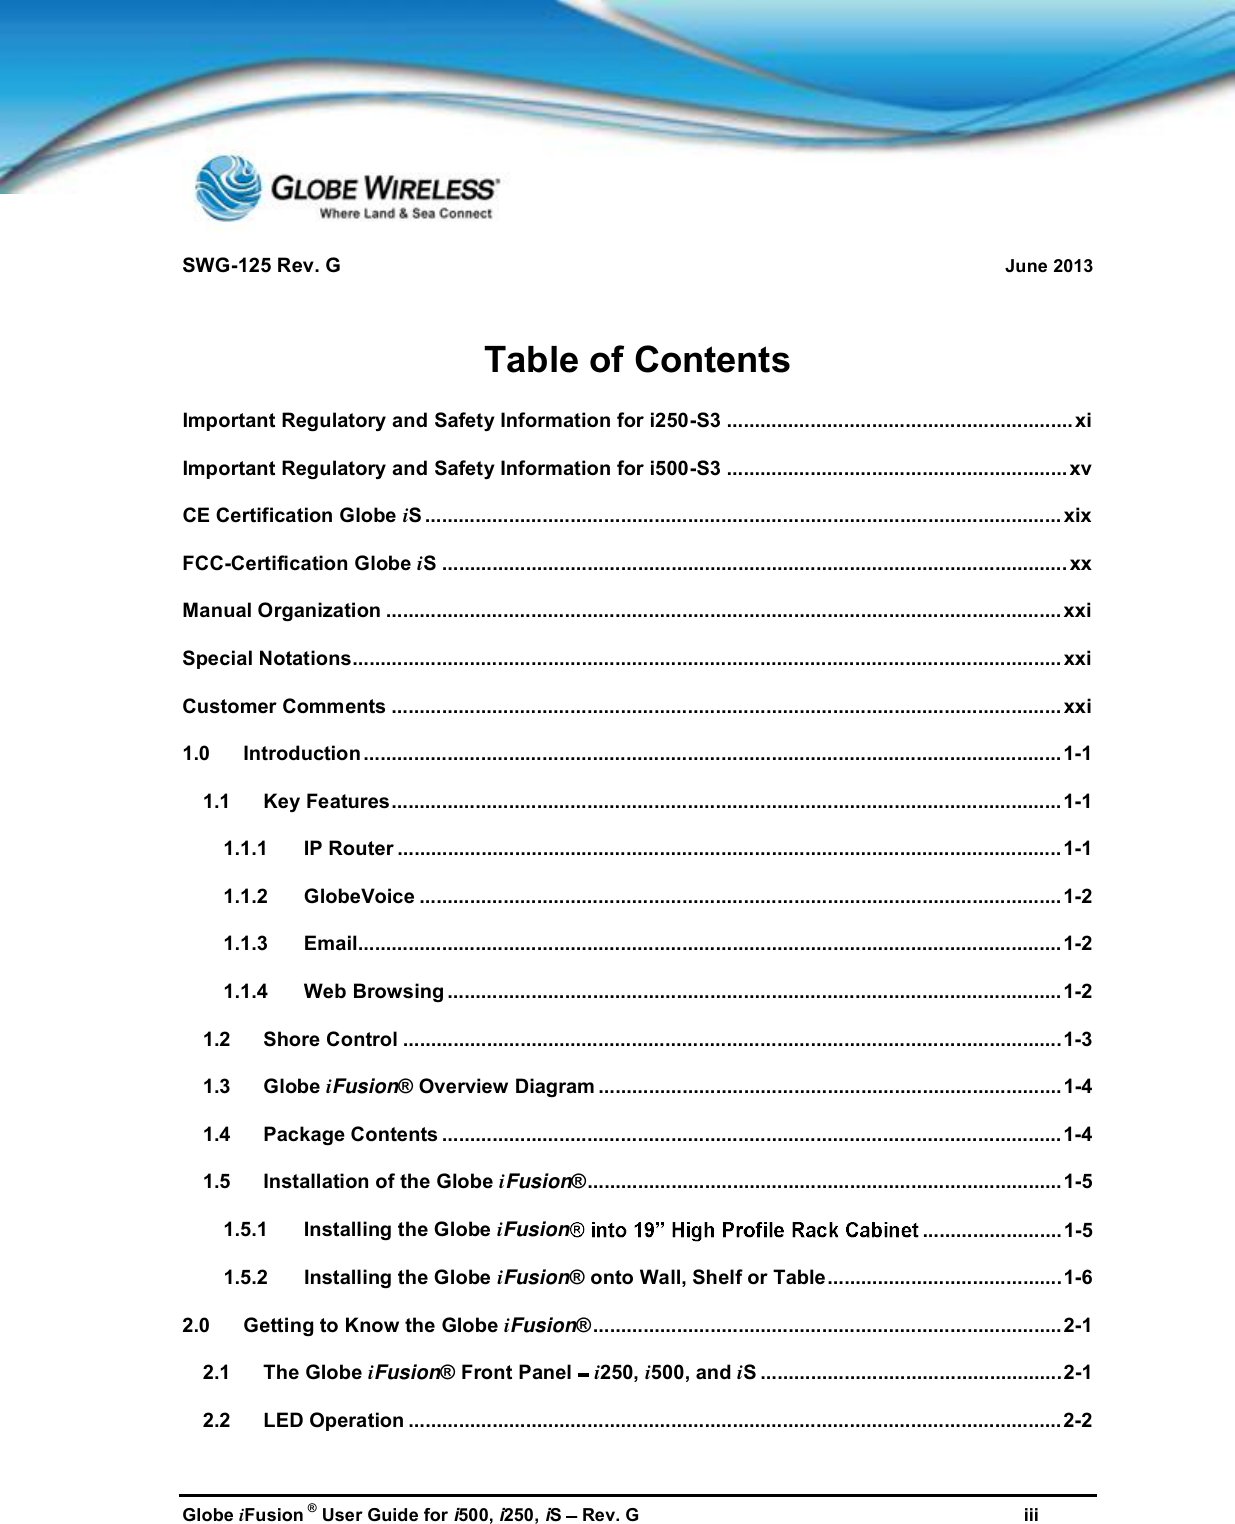 SWG-125 Rev. G June 2013Globe iFusion ®User Guide for i500, i250, iSRev. G iiiTable of ContentsImportant Regulatory and Safety Information for i250-S3 .............................................................. xiImportant Regulatory and Safety Information for i500-S3 ............................................................. xvCE Certification Globe iS .................................................................................................................. xixFCC-Certification Globe iS ................................................................................................................ xxManual Organization ......................................................................................................................... xxiSpecial Notations............................................................................................................................... xxiCustomer Comments ........................................................................................................................ xxi1.0 Introduction.............................................................................................................................1-11.1 Key Features........................................................................................................................ 1-11.1.1 IP Router .......................................................................................................................1-11.1.2 GlobeVoice ................................................................................................................... 1-21.1.3 Email..............................................................................................................................1-21.1.4 Web Browsing ..............................................................................................................1-21.2 Shore Control ......................................................................................................................1-31.3 Globe iFusion® Overview Diagram ...................................................................................1-41.4 Package Contents ...............................................................................................................1-41.5 Installation of the Globe iFusion®.....................................................................................1-51.5.1 Installing the Globe iFusion ......................... 1-51.5.2 Installing the Globe iFusion® onto Wall, Shelf or Table..........................................1-62.0 Getting to Know the Globe iFusion®....................................................................................2-12.1 The Globe iFusion® Front Panel i250, i500, and iS ......................................................2-12.2 LED Operation .....................................................................................................................2-2